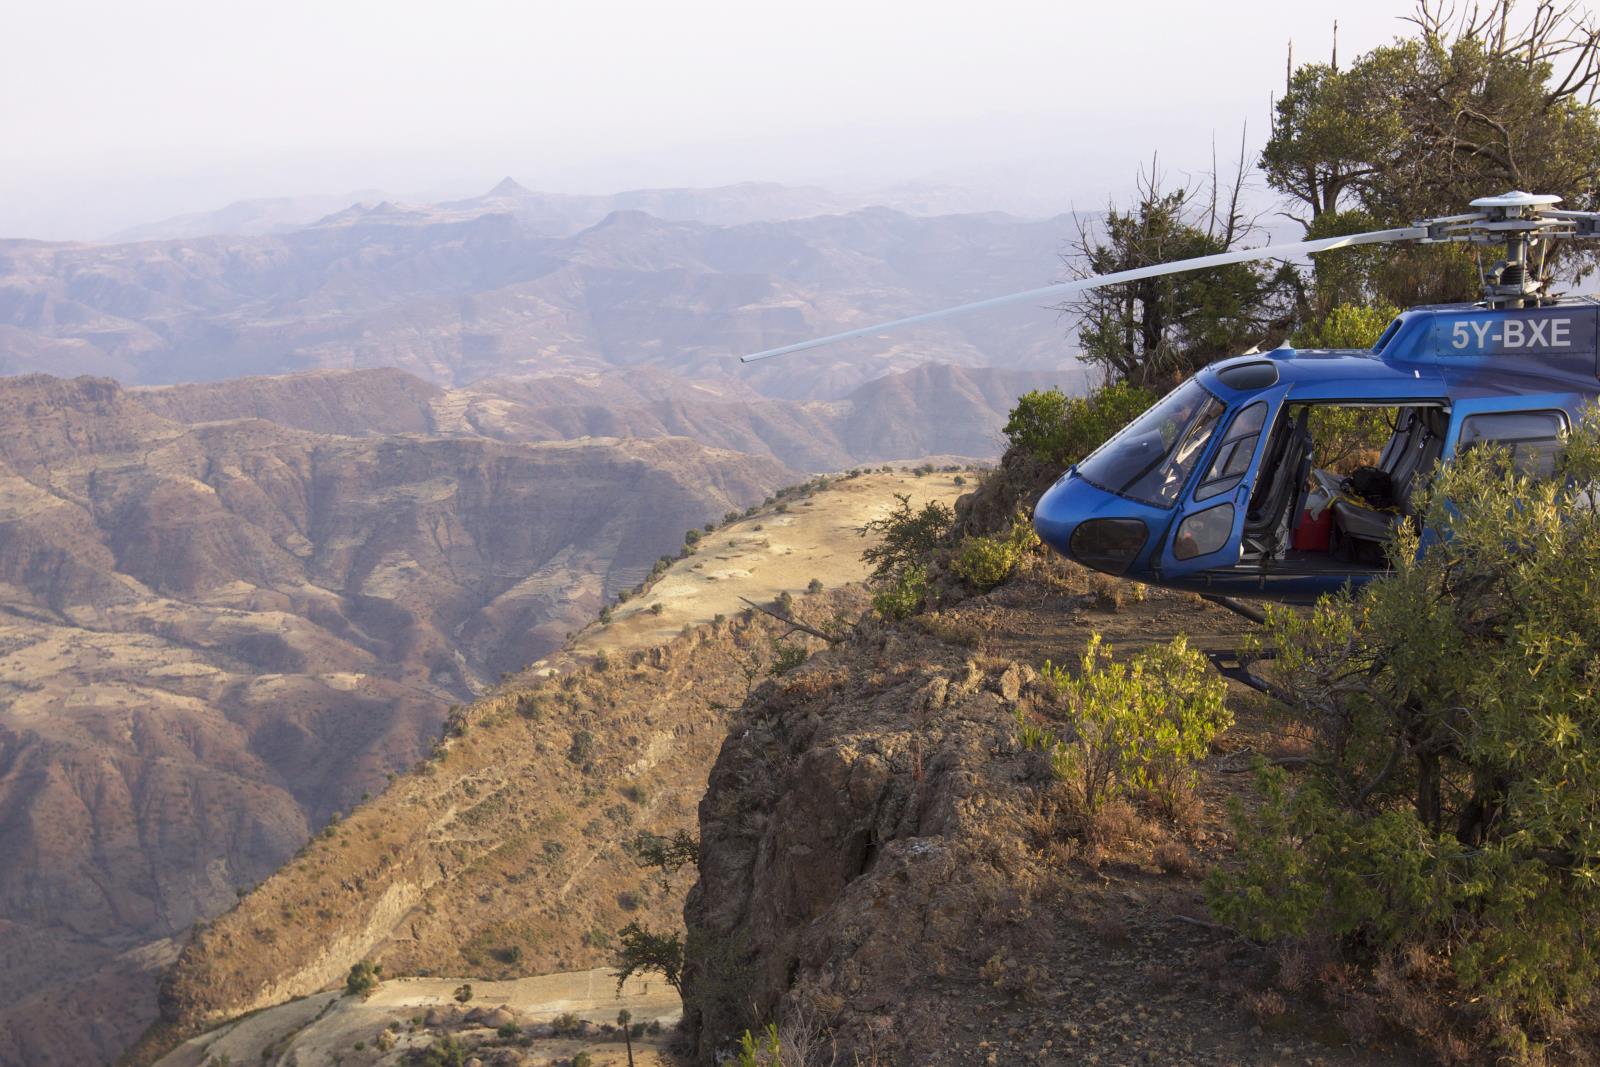 Sunrise on the Simien Mountains - Ethiopia By Helicopter